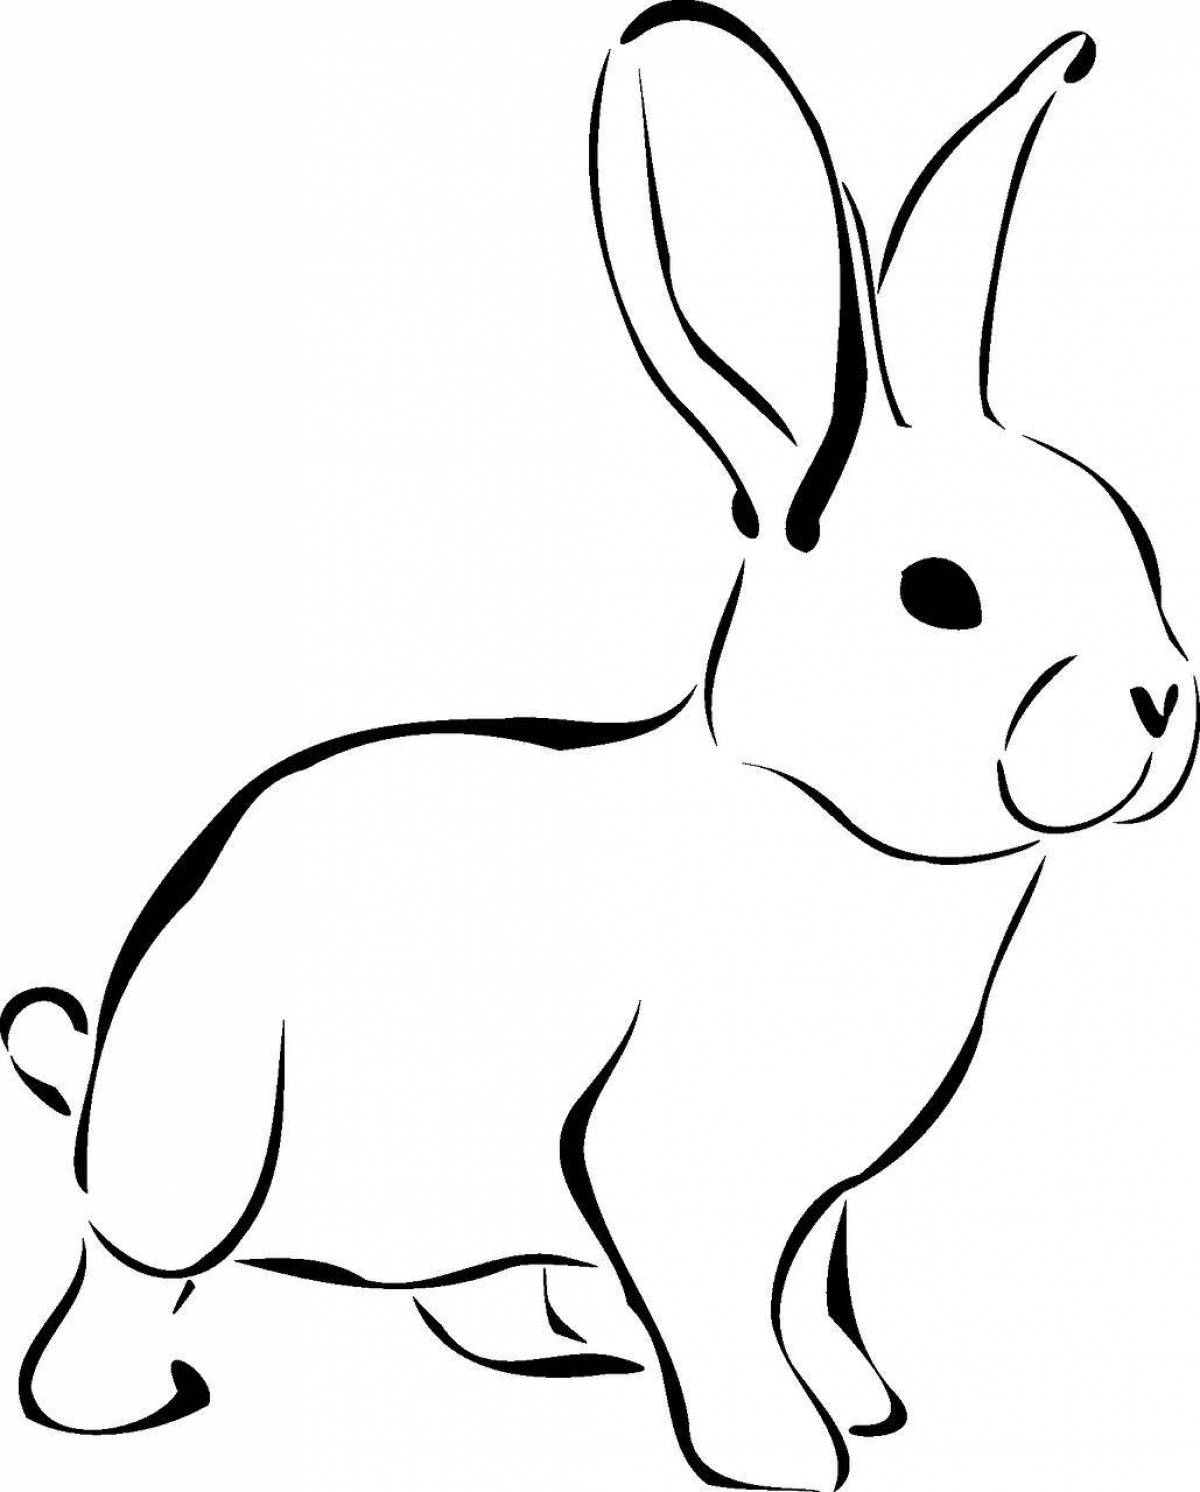 Nice rabbit coloring book for kids 2-3 years old